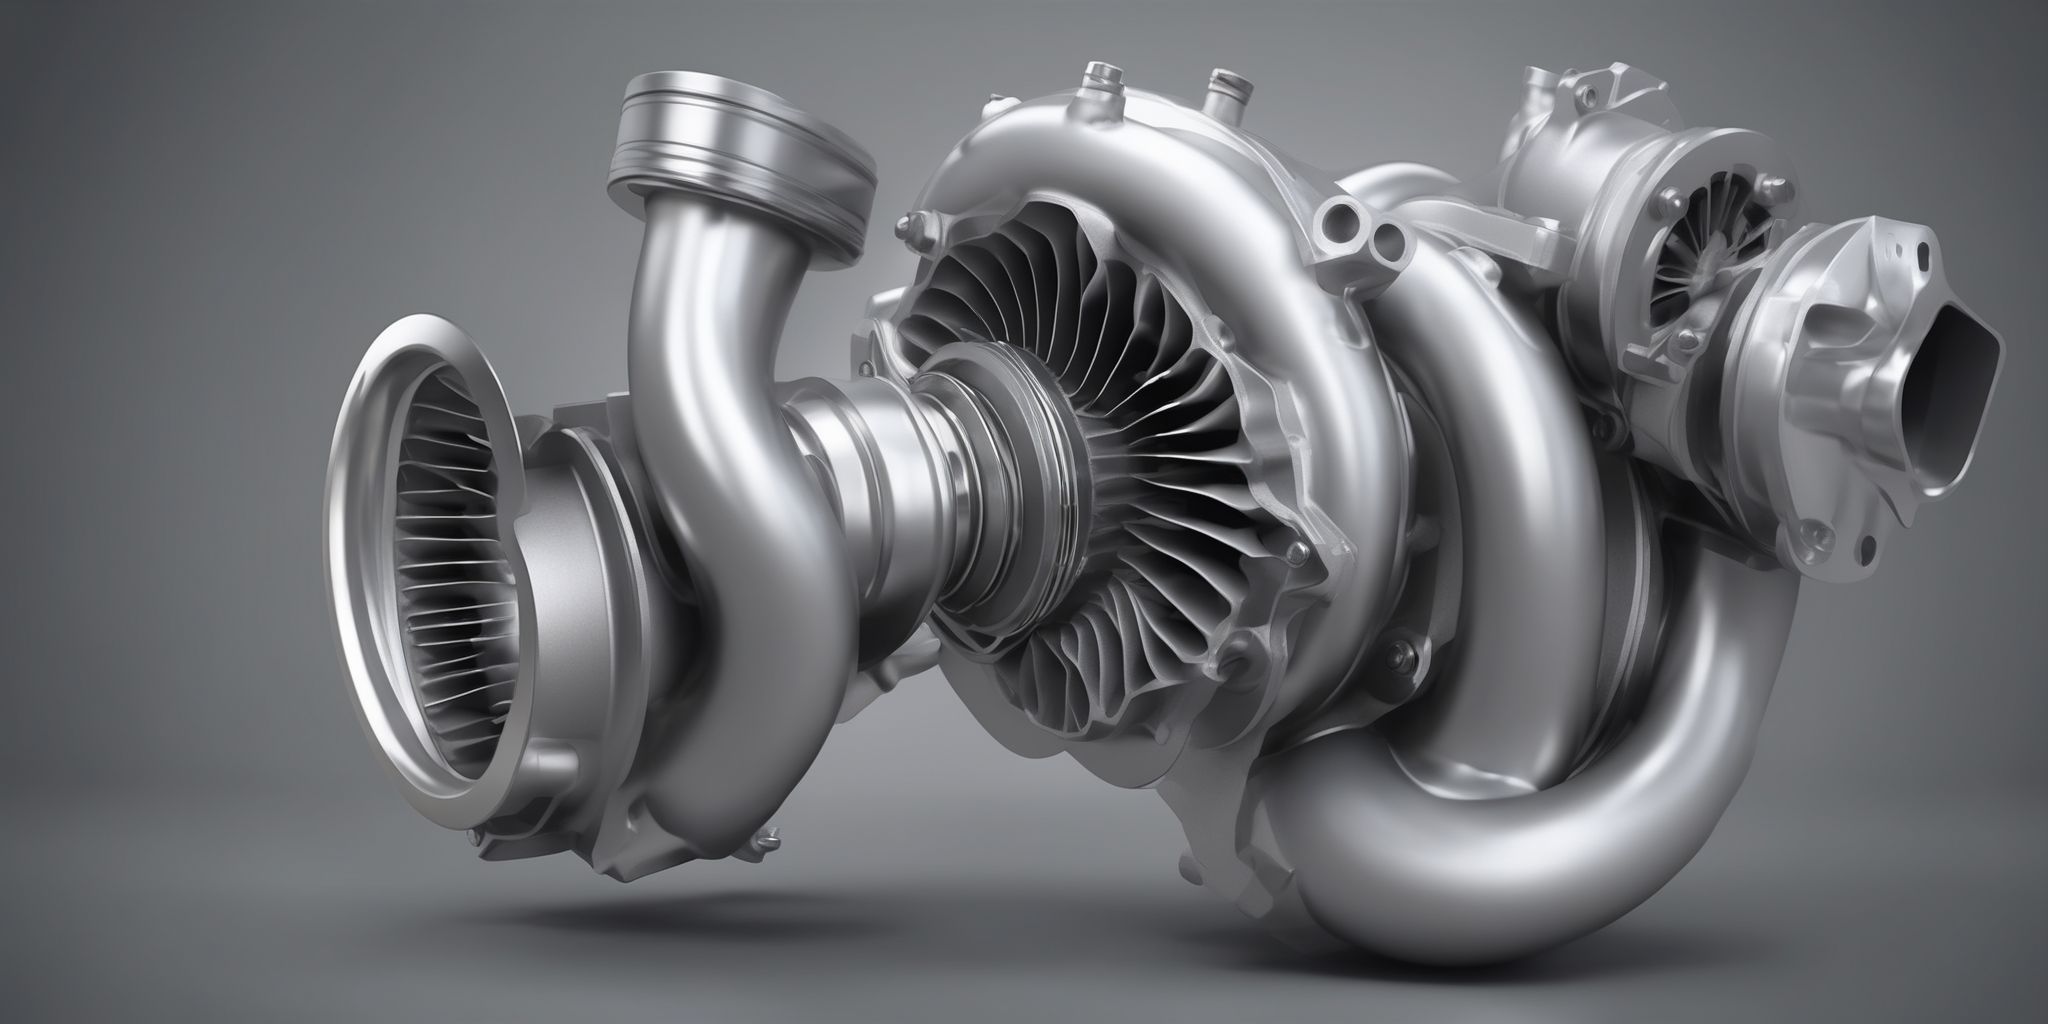 Turbocharger  in realistic, photographic style